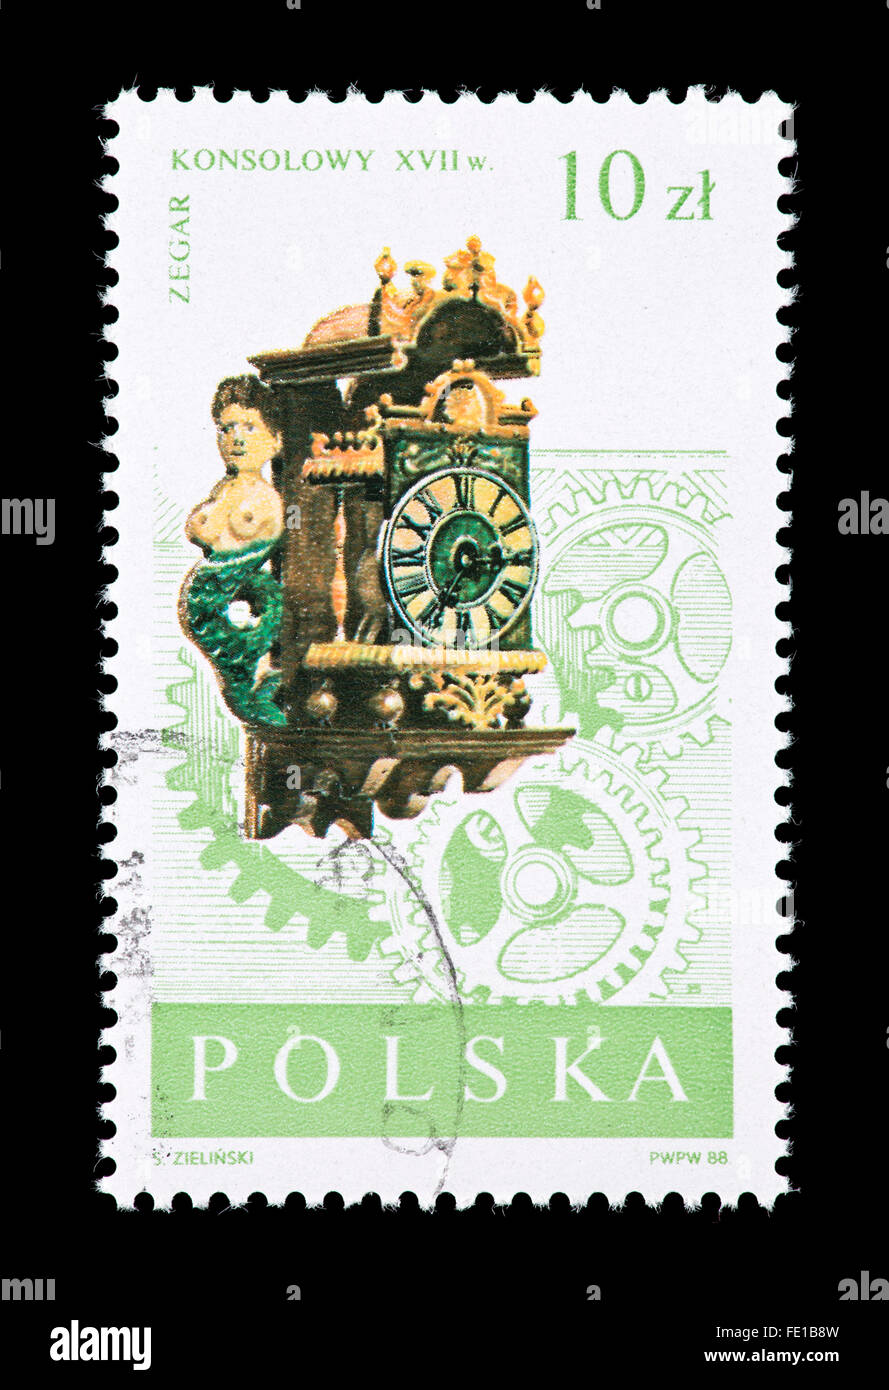 Postage stamp from Poland depicting a 17th century Frisian wall clock from Museum of Artistic and Precision Handicrafts, Warsaw Stock Photo